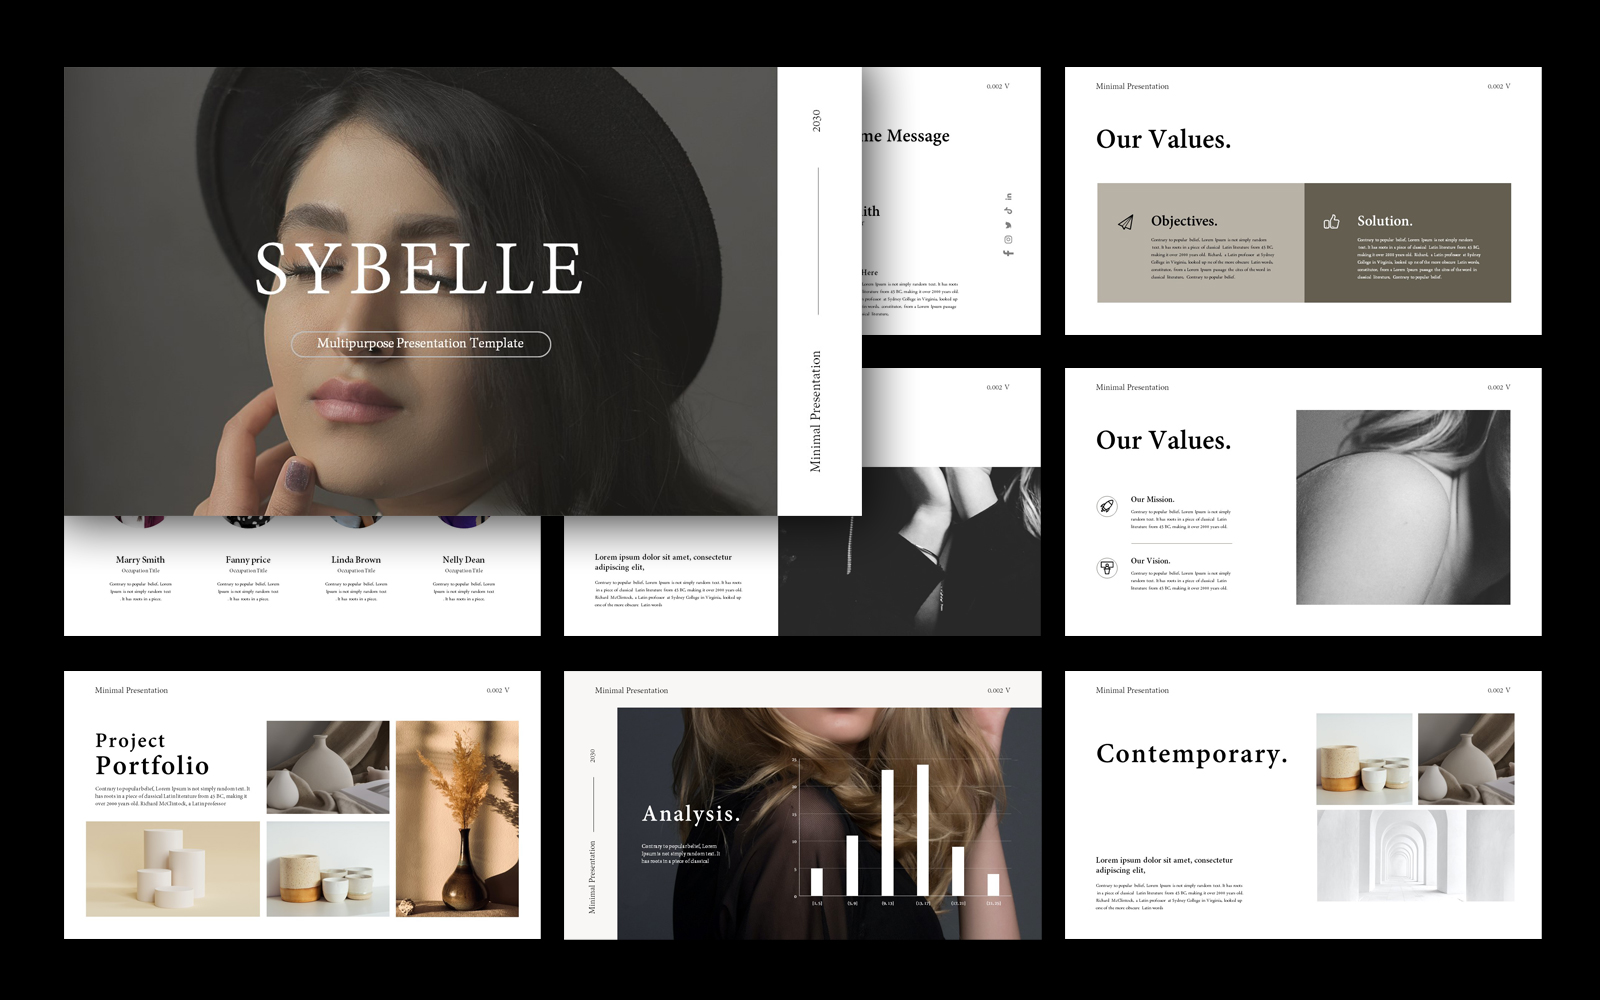 Sybelle PowerPoint Presentation Template